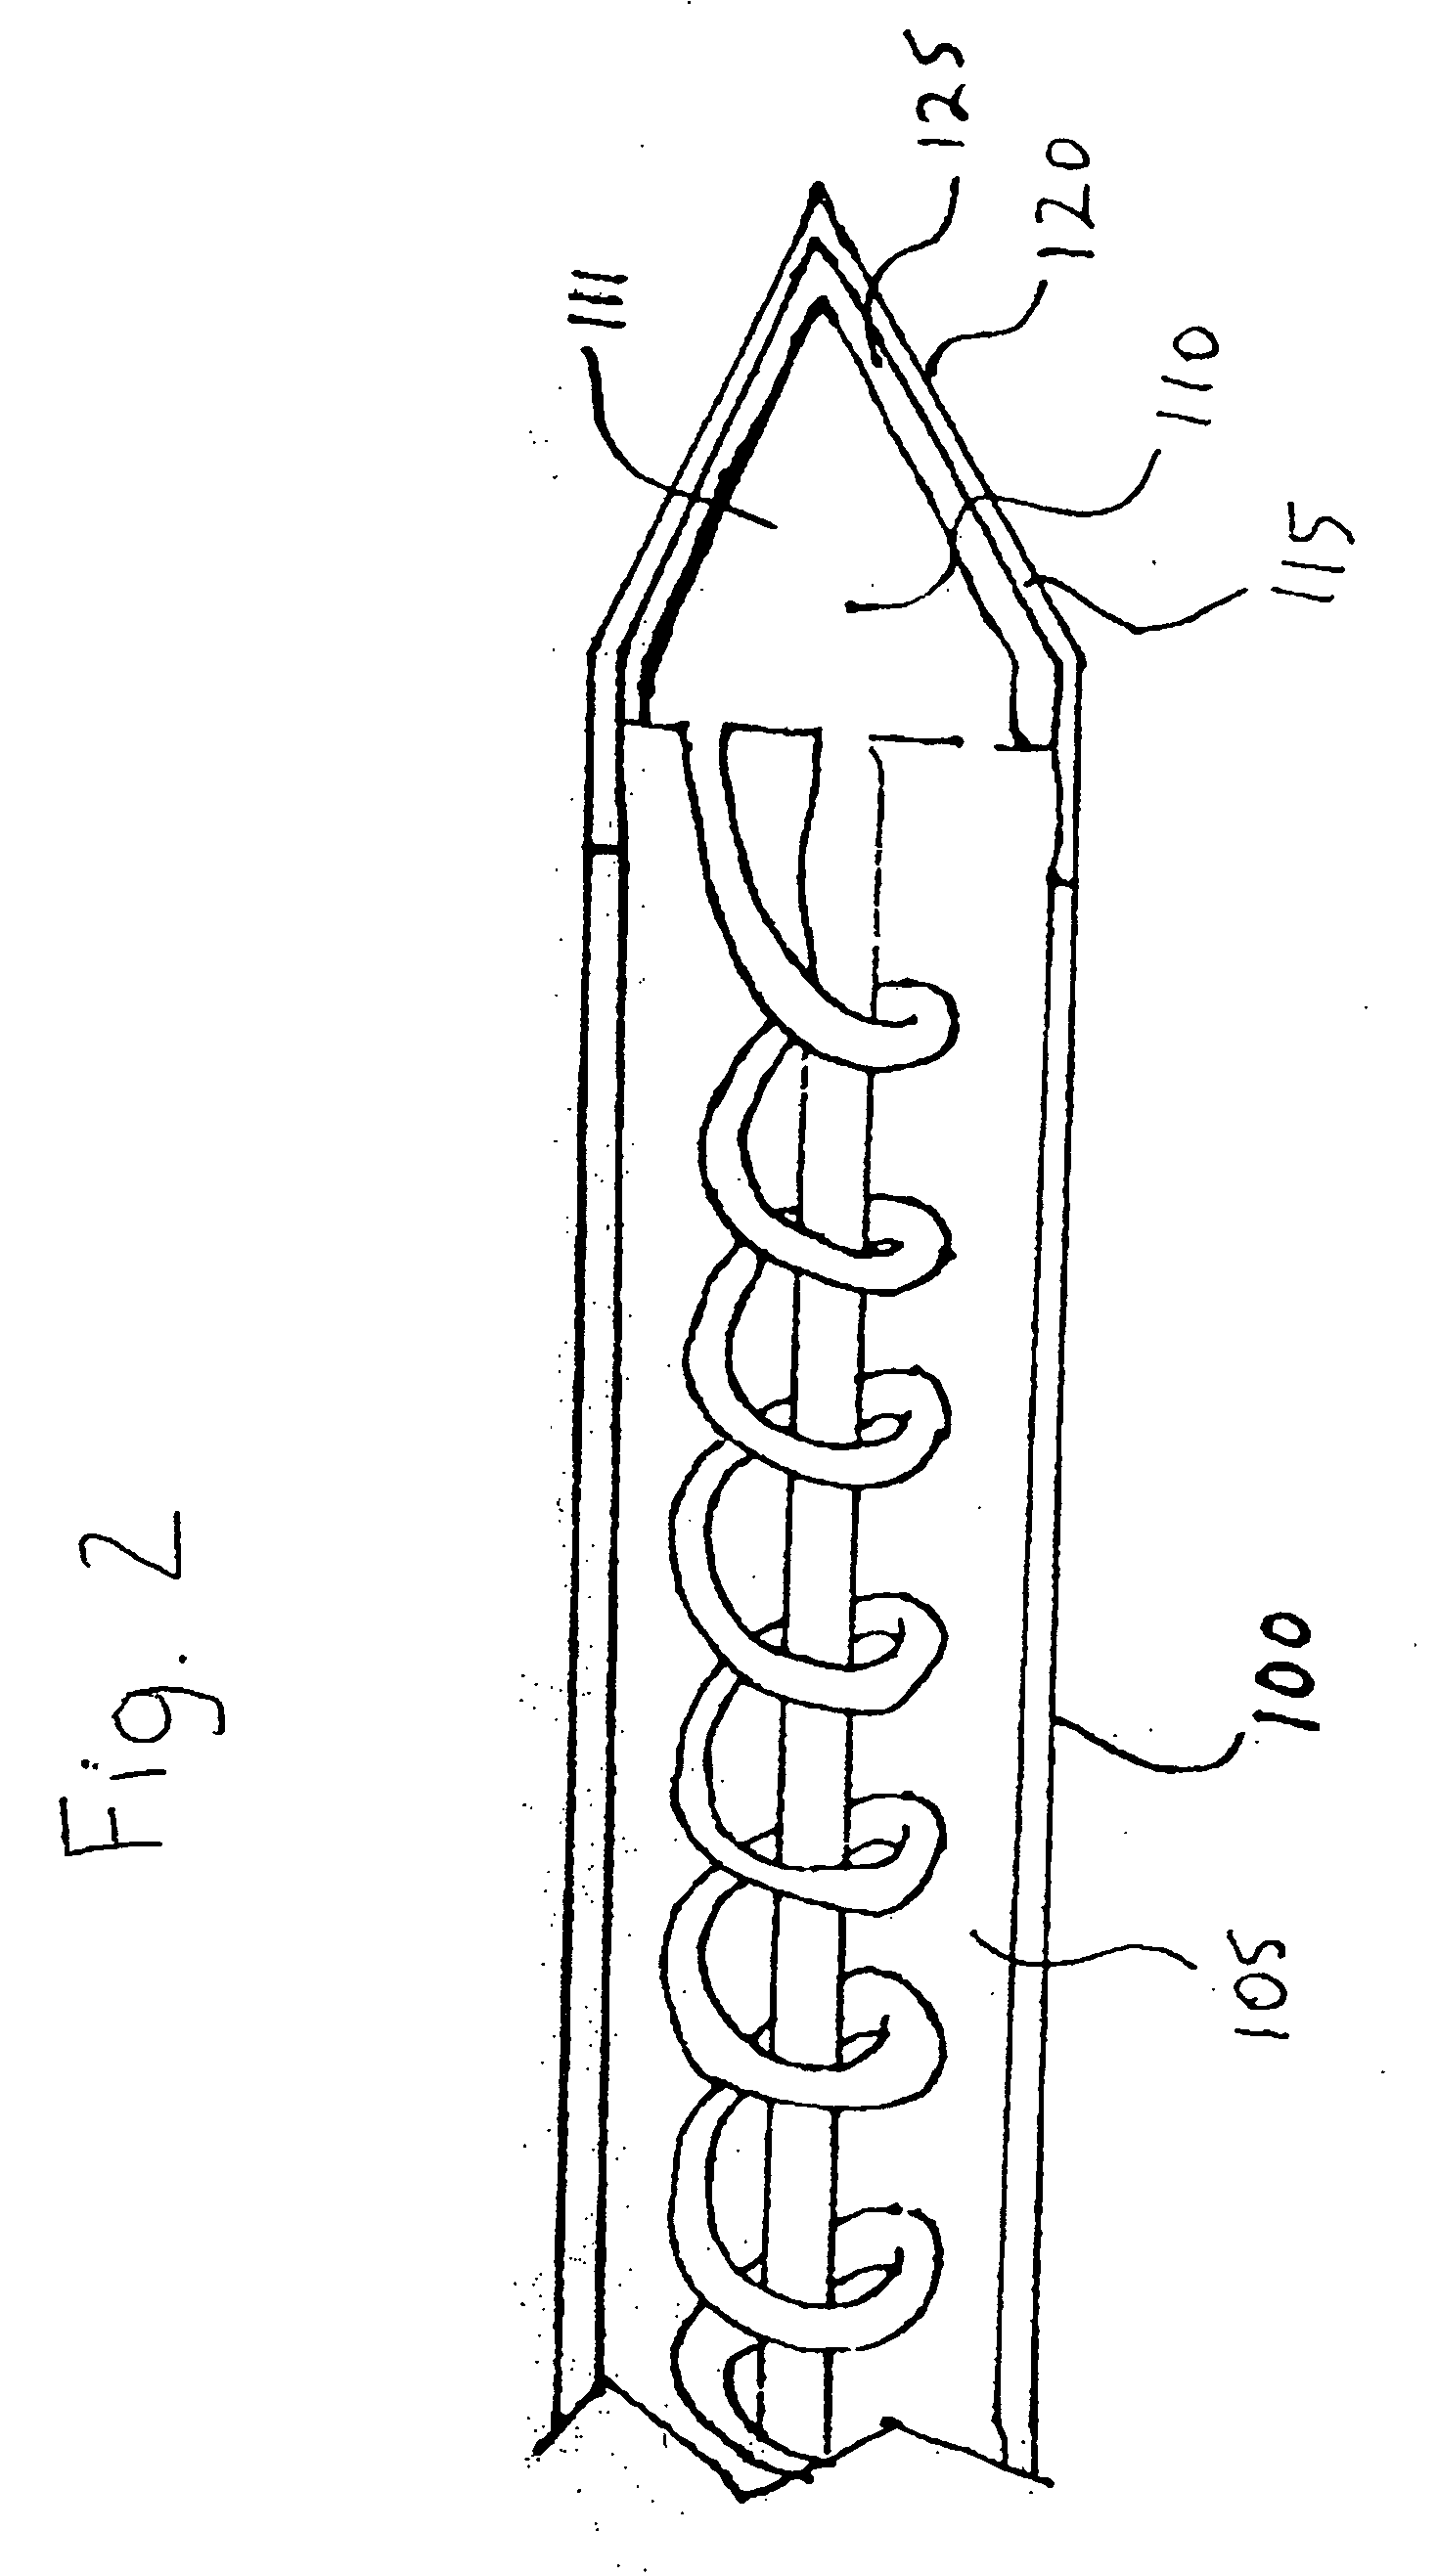 Cryoprobe with reduced adhesion to frozen tissue, and cryosurgical methods utilizing same